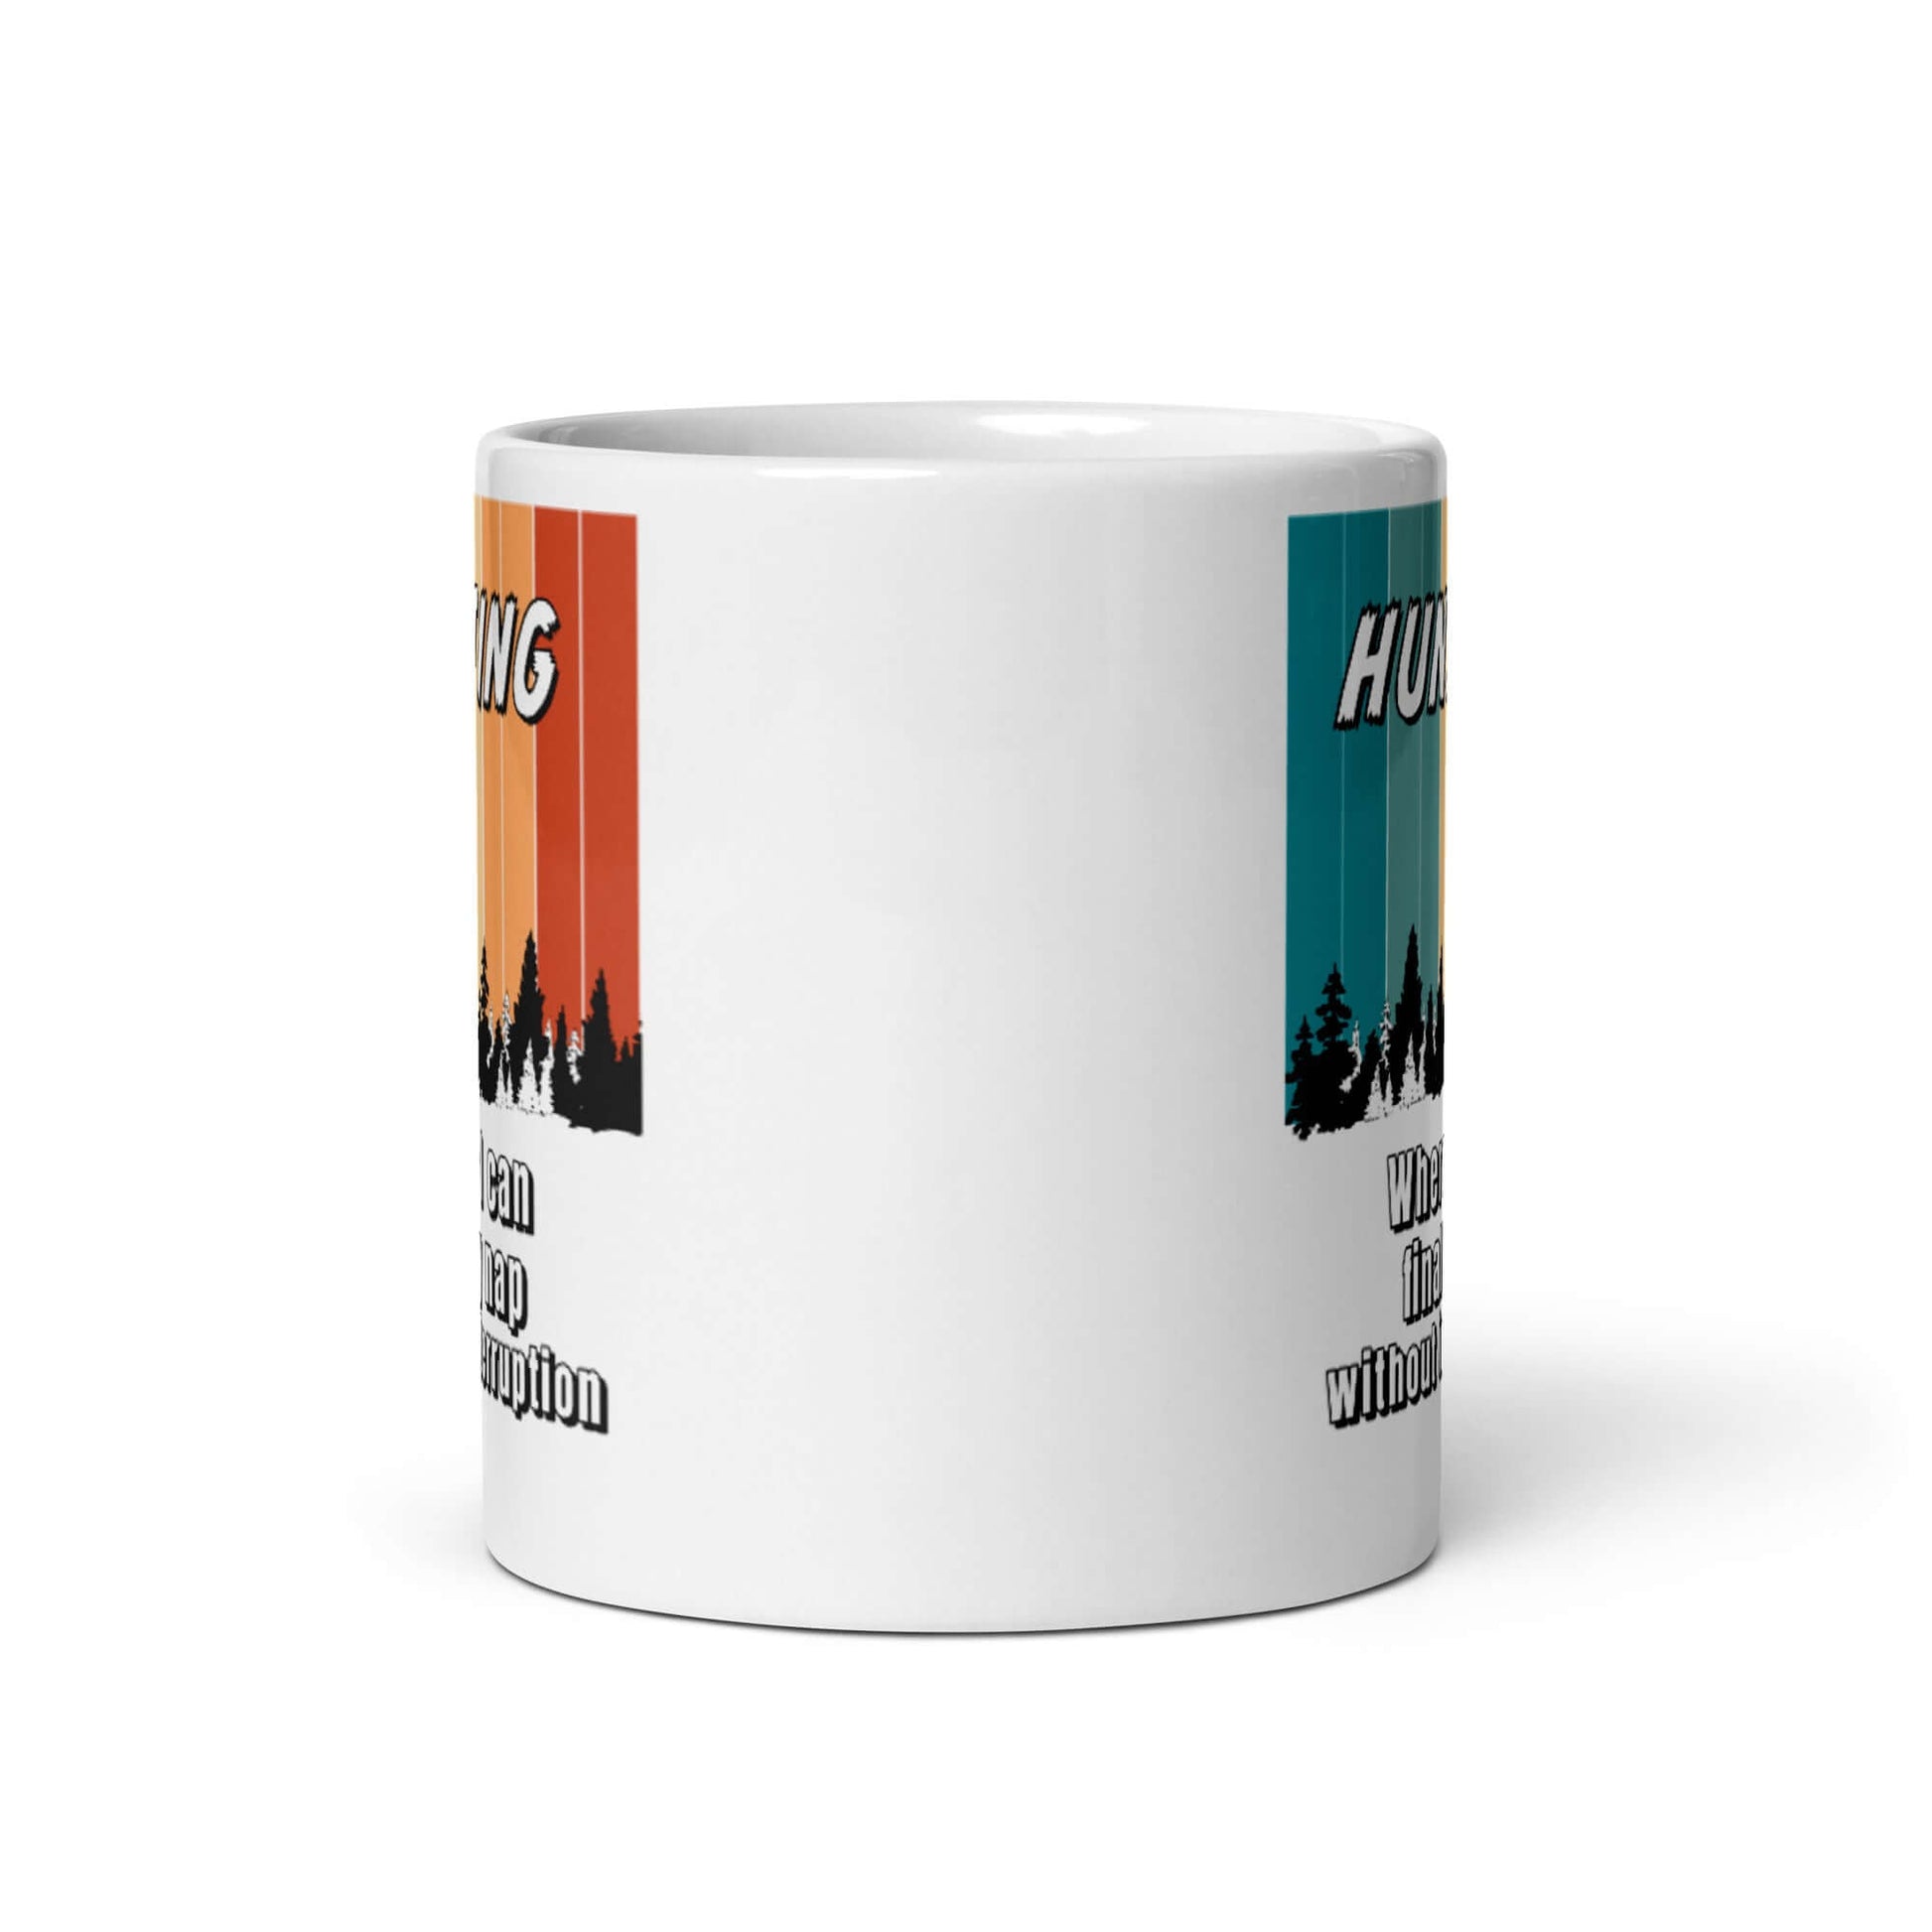 HUNTING - Where I get to nap without interruption - White glossy mug - Horrible Designs